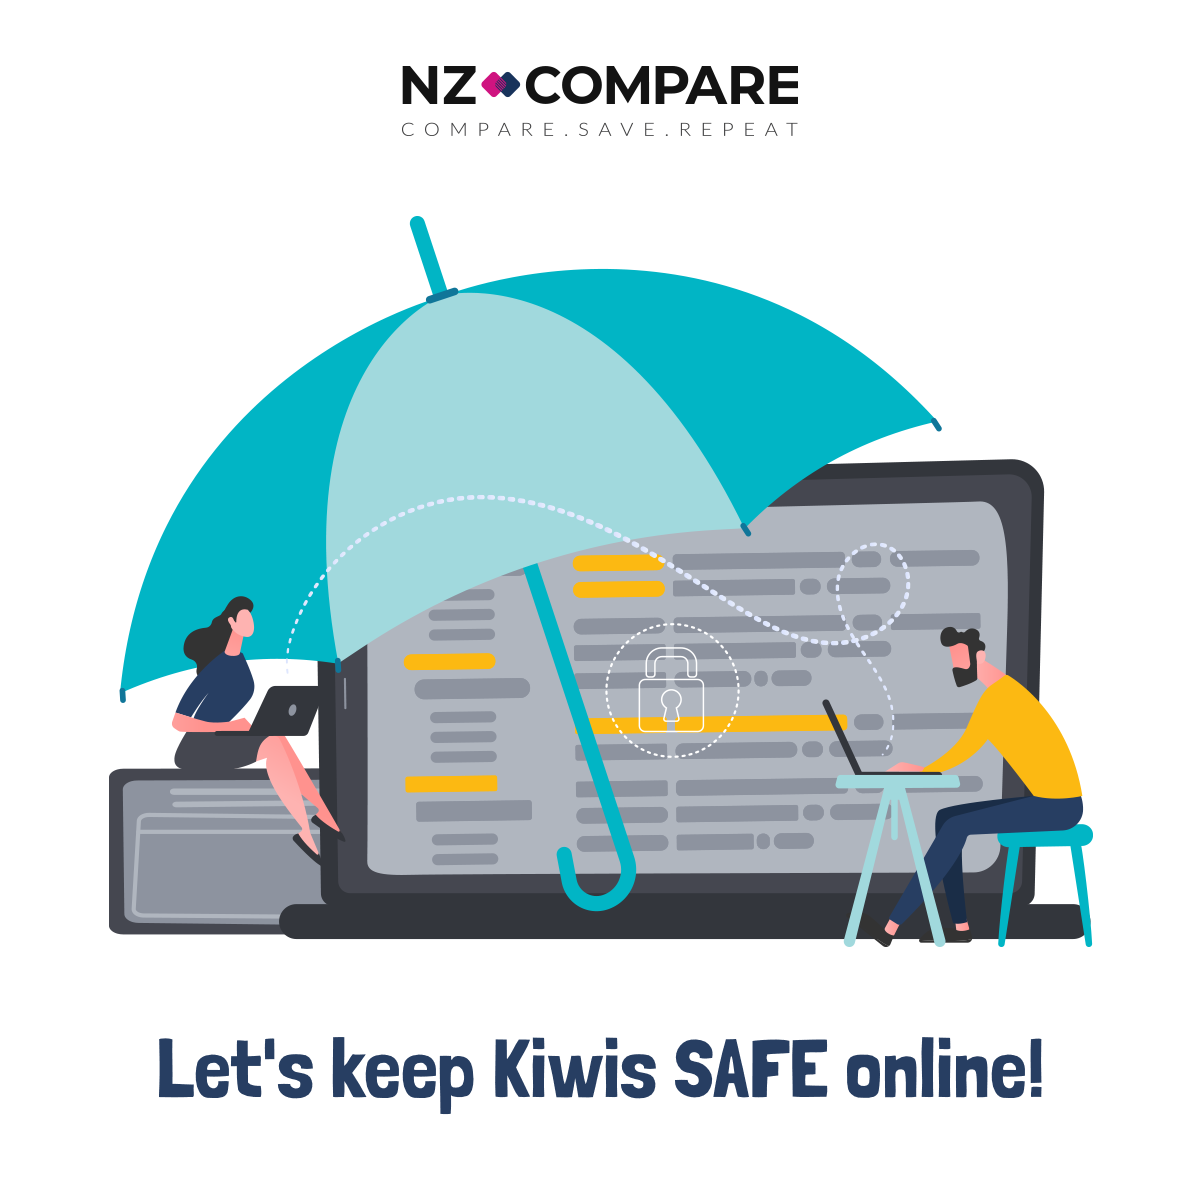 Get netsafe and compare your broadband plans with broadband compare